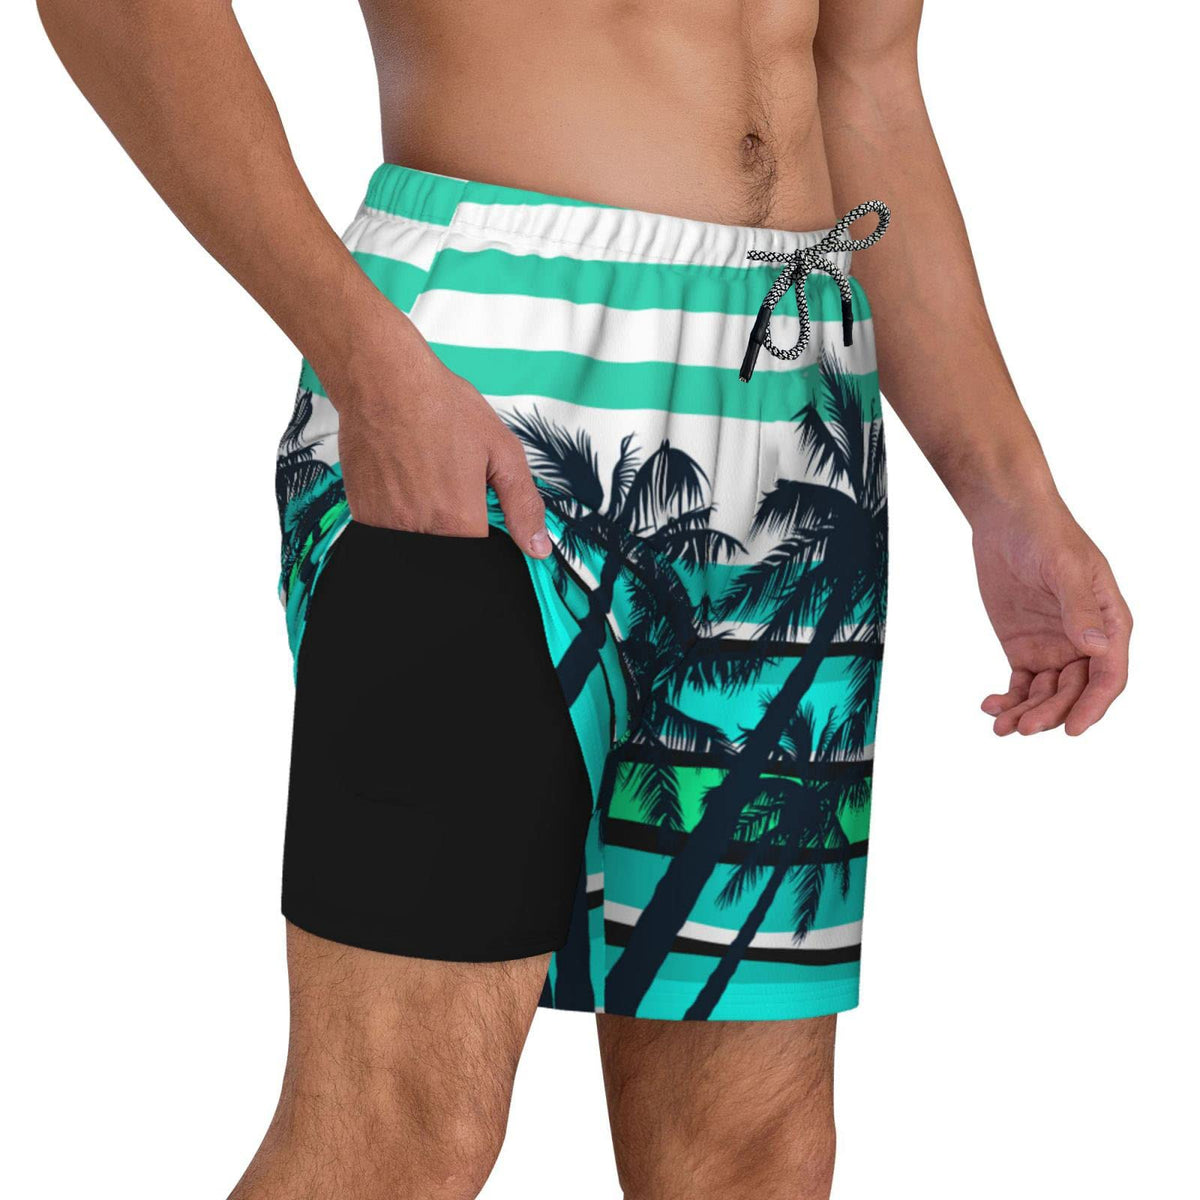 Men's 9" Inseam Swim Trunks With Compression Liner Quick Dry Swim Bathing Suit - Palm Tree Green